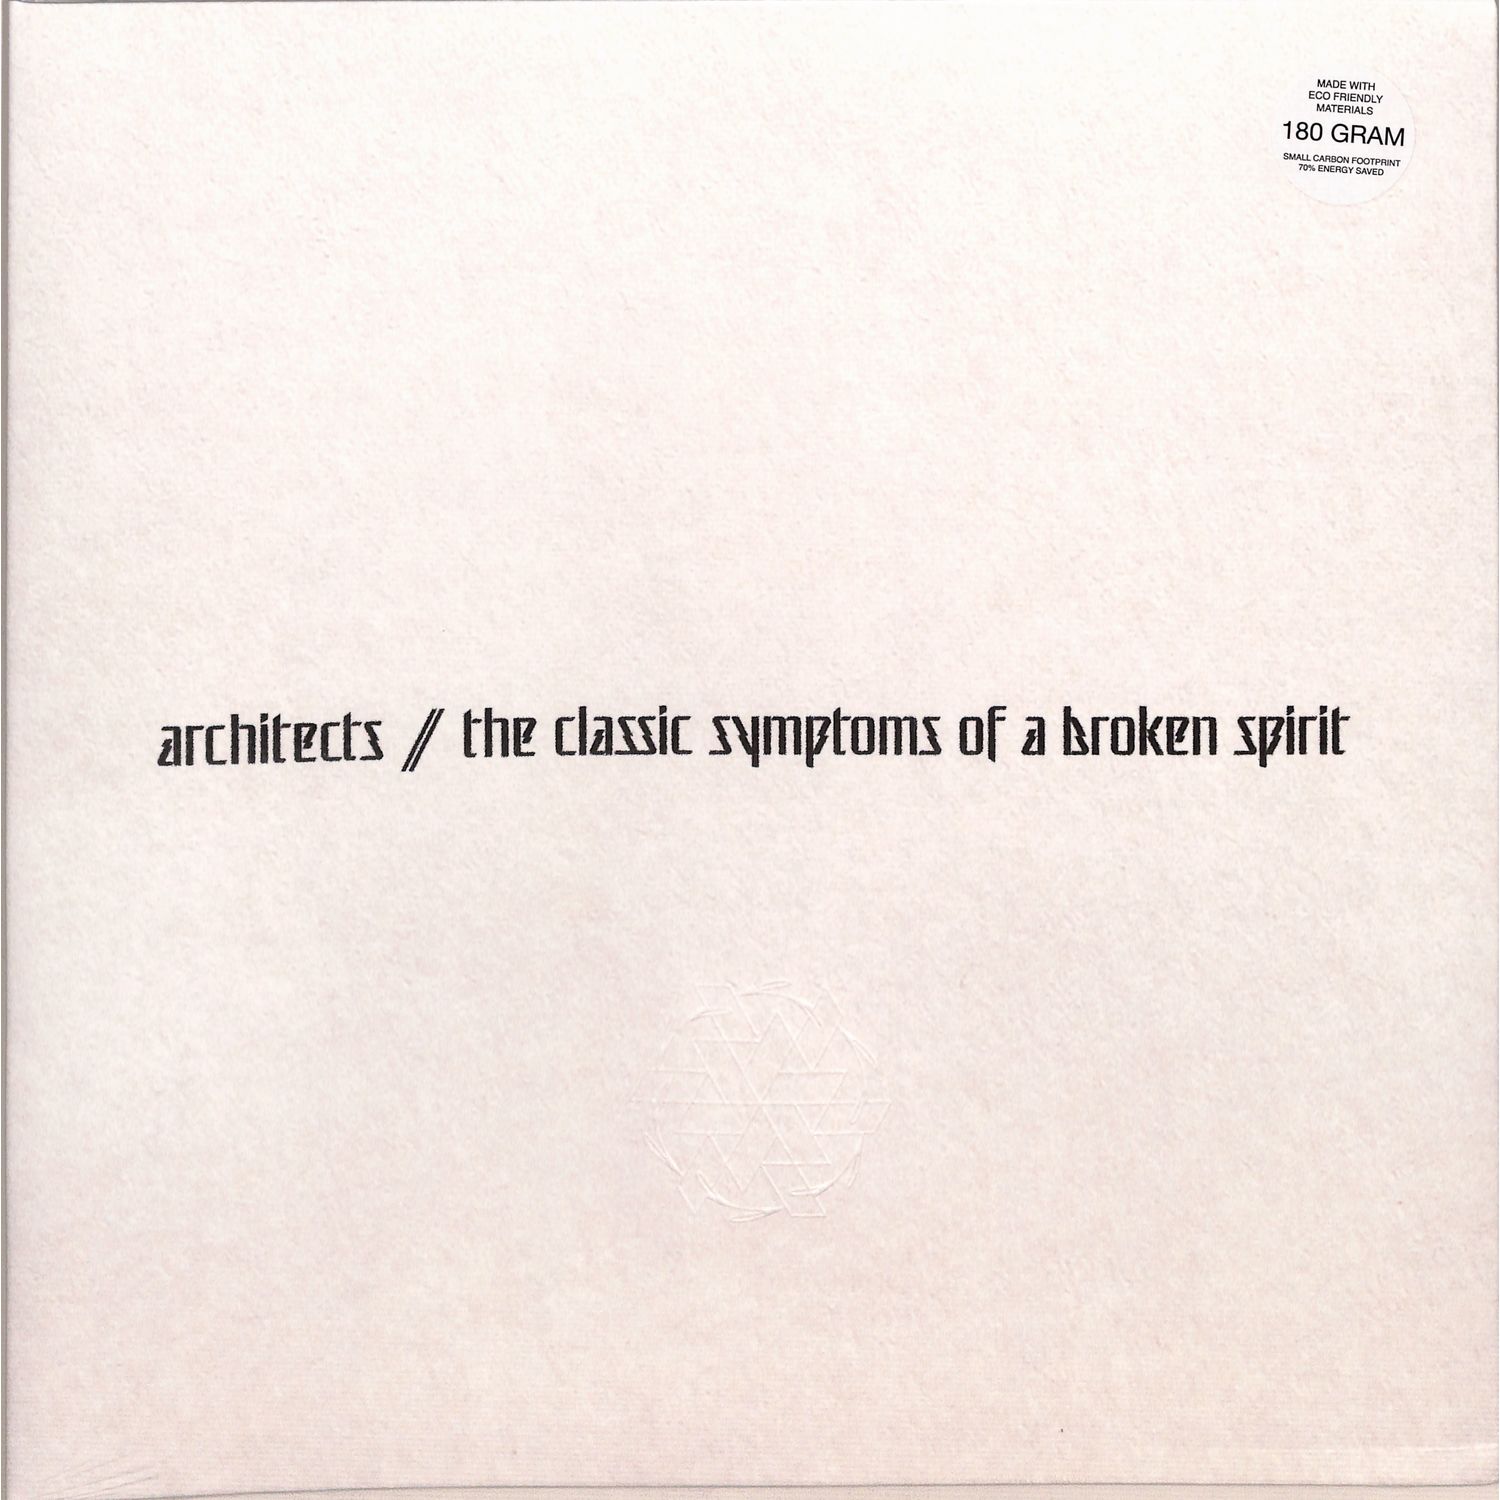 Architects - THE CLASSIC SYMPTOMS OF A BROKEN SPIRIT 